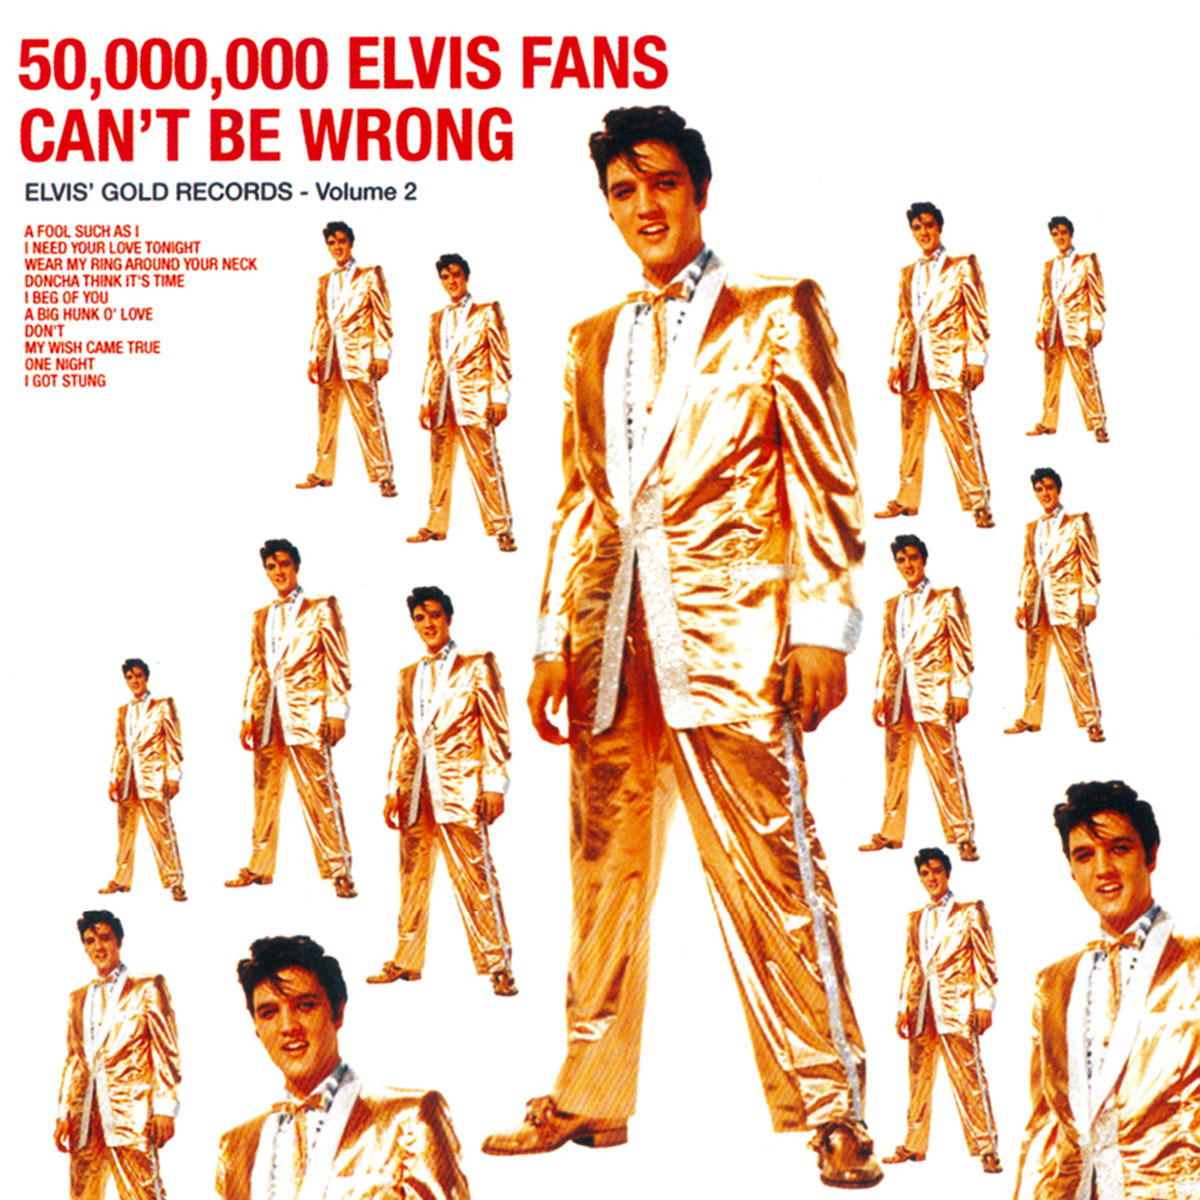 The album cover for Elvis Presley’s nineteen fifty-nine greatest hits album titled “50,000,000 Elvis Fans Can’t Be Wrong: Elvis’ Gold Records, Volume 2.”